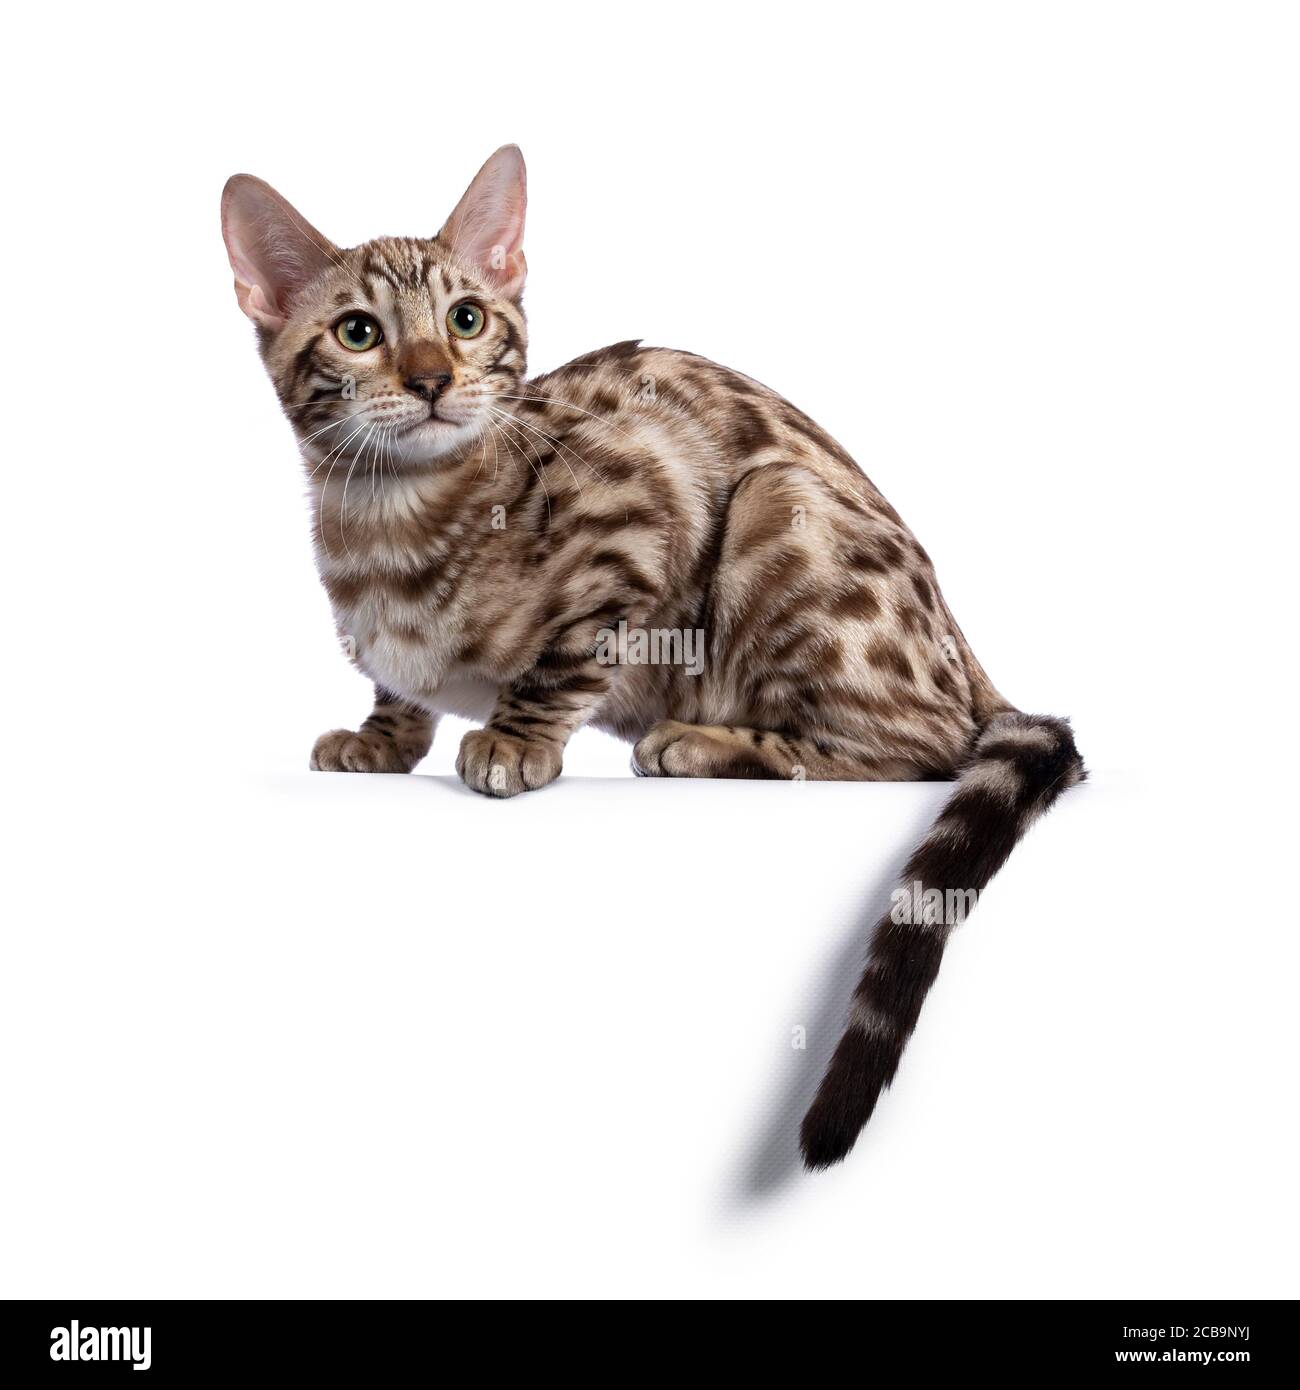 Young snow bengal cat kitten, laying down side ways. Looking above camera with greenish eyes. Isolated on white background. Tail over edge. Stock Photo